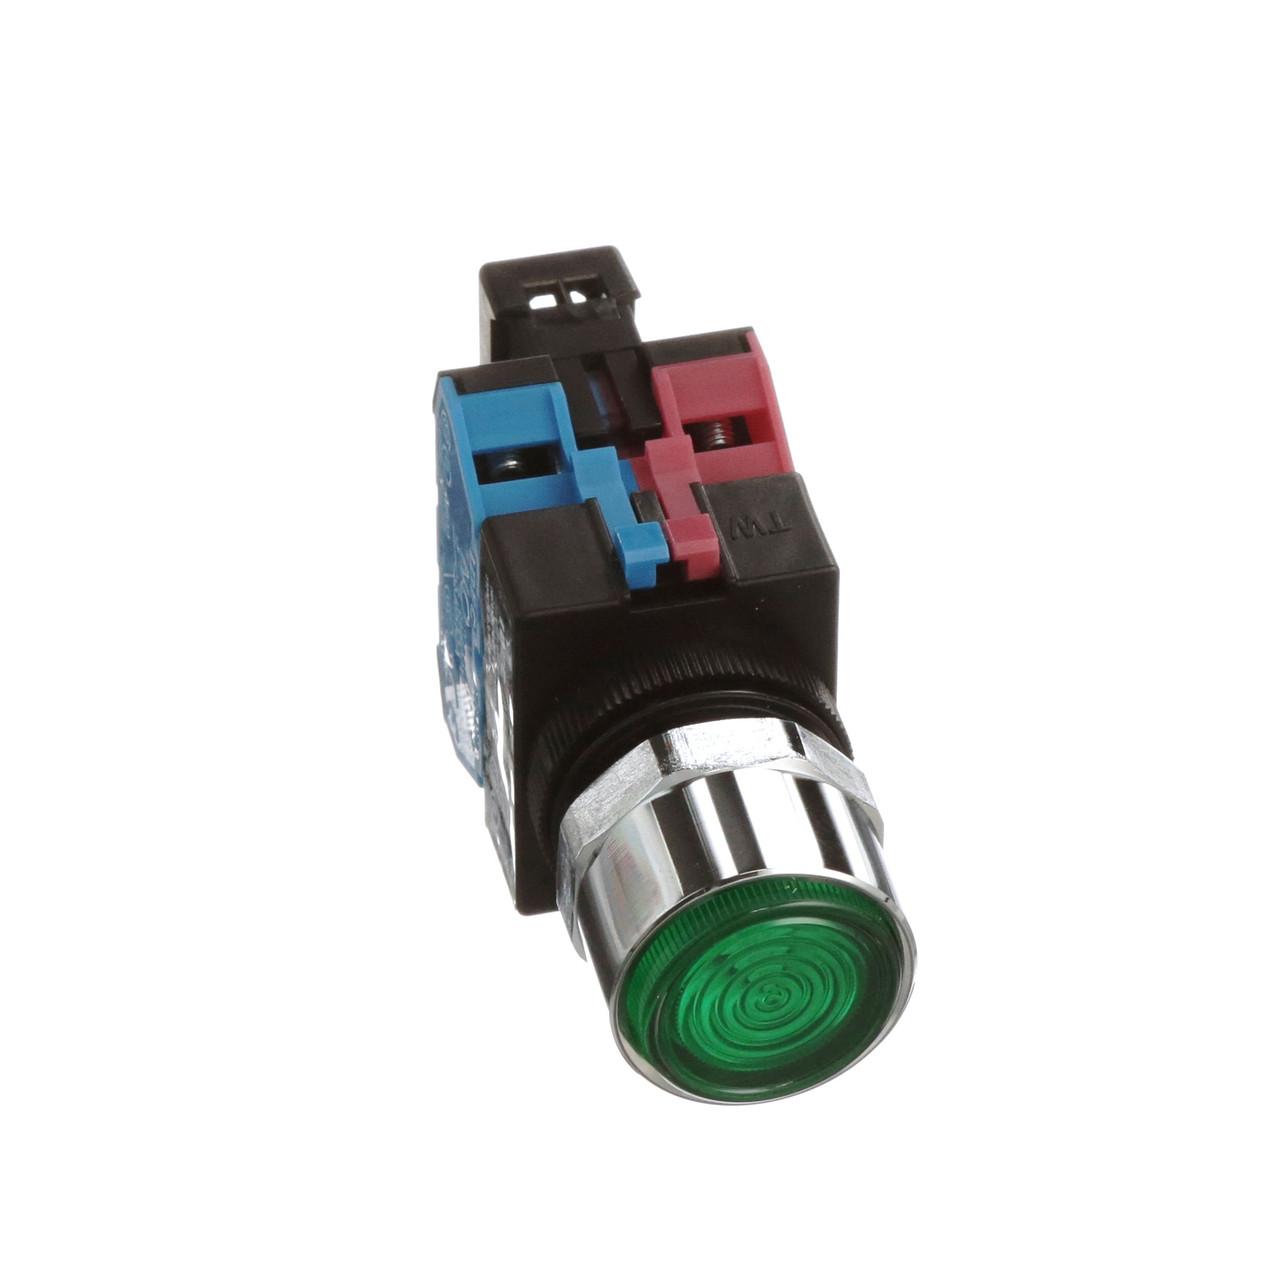 Idec ALFW29911D-G-24V 22mm Pushbutton Illuminated, Corrosion resistant octagonal chrome plated locking bezel, Snap on 10A contacts, Modular contruction for maximum flexibility, NEMA 4X and IP65 watertight/oiltight panel sealing, Available assembled or as sub-components, UL Lis